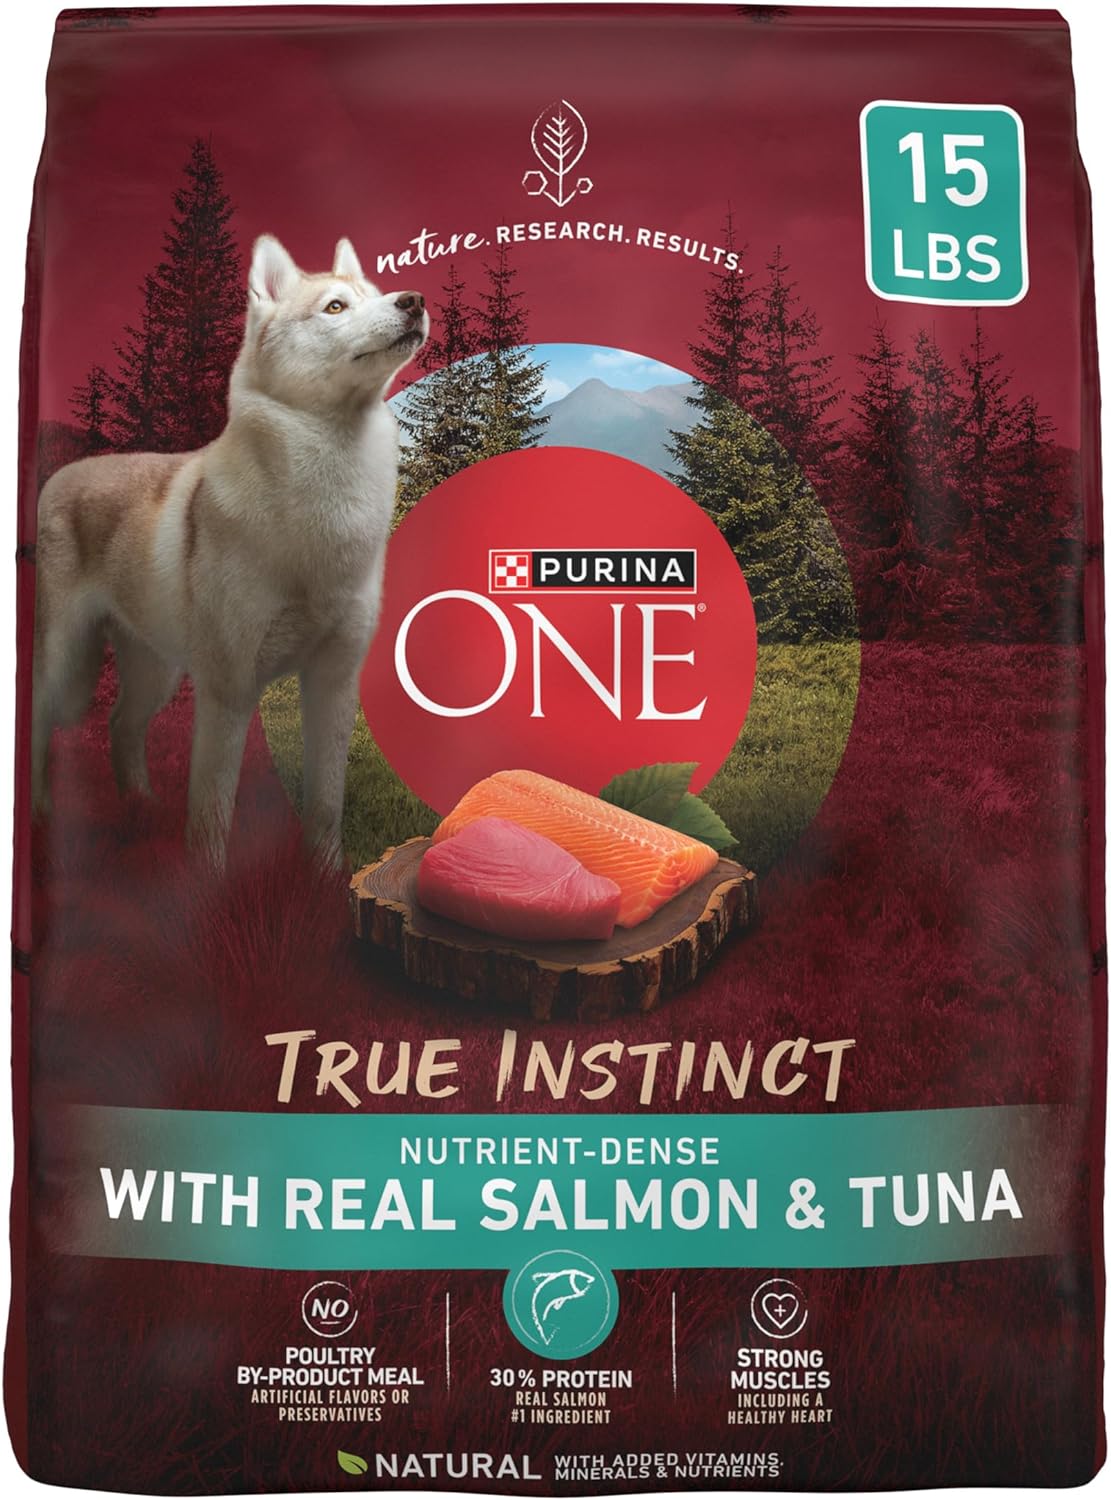 Purina ONE True Instinct With Real Salmon and Tuna Natural With Added Vitamins, Minerals and Nutrients High Protein Dog Food Dry Formula - 15 lb. Bag